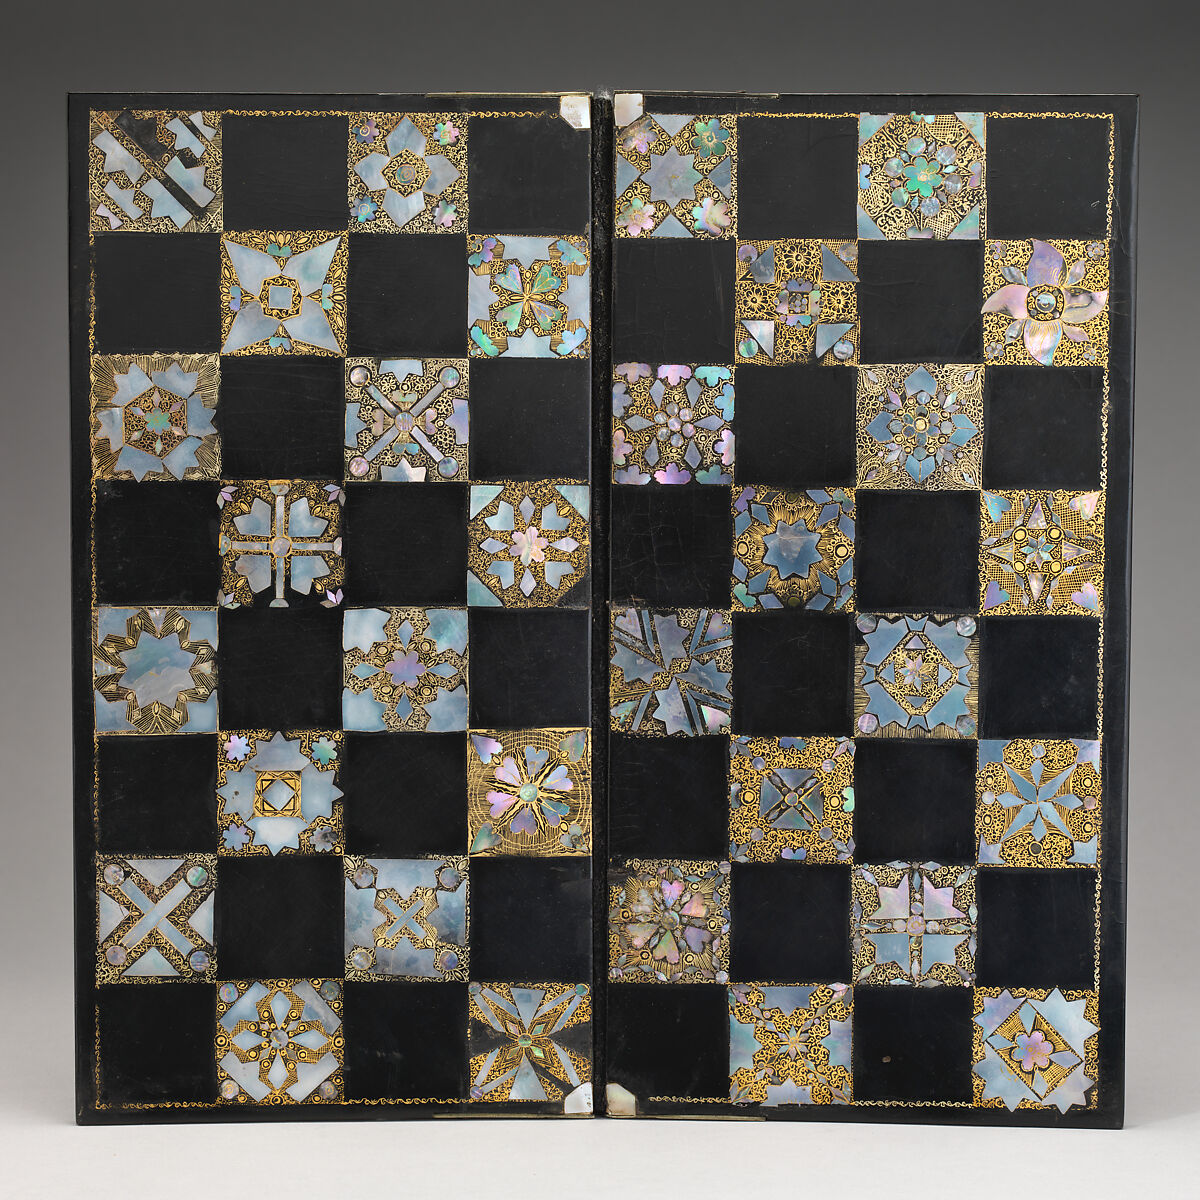 Chessboard, Lacquer, papier maché, mother-of-pearl, British 